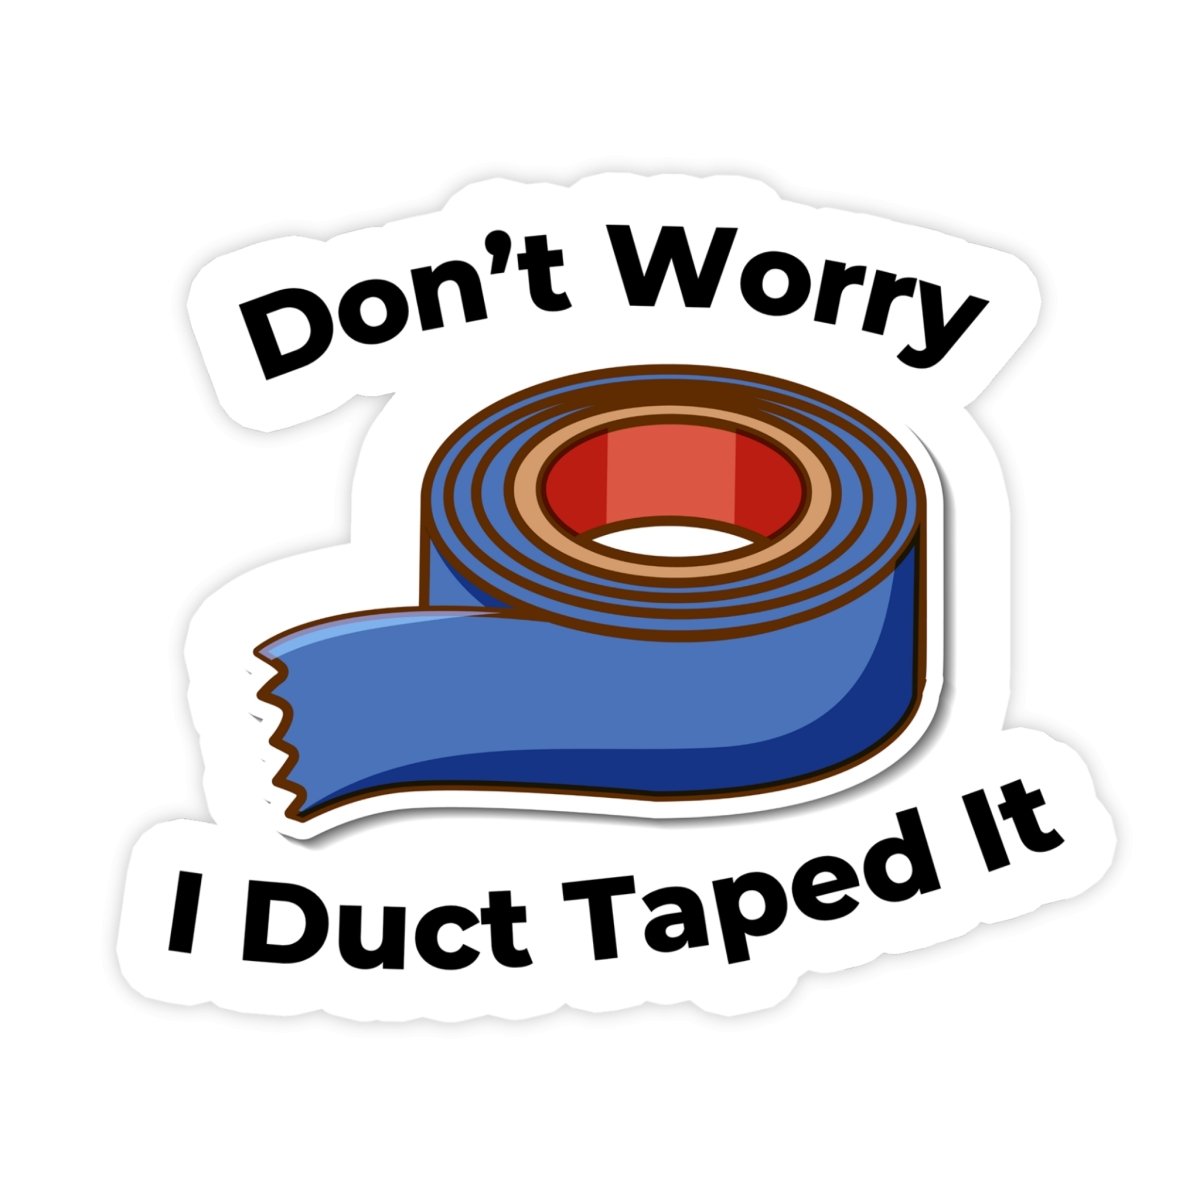 Don't Worry I Duct Taped It Meme Sticker - stickerbullDon't Worry I Duct Taped It Meme StickerRetail StickerstickerbullstickerbullDuctTaped_Don't Worry I Duct Taped It Meme Sticker